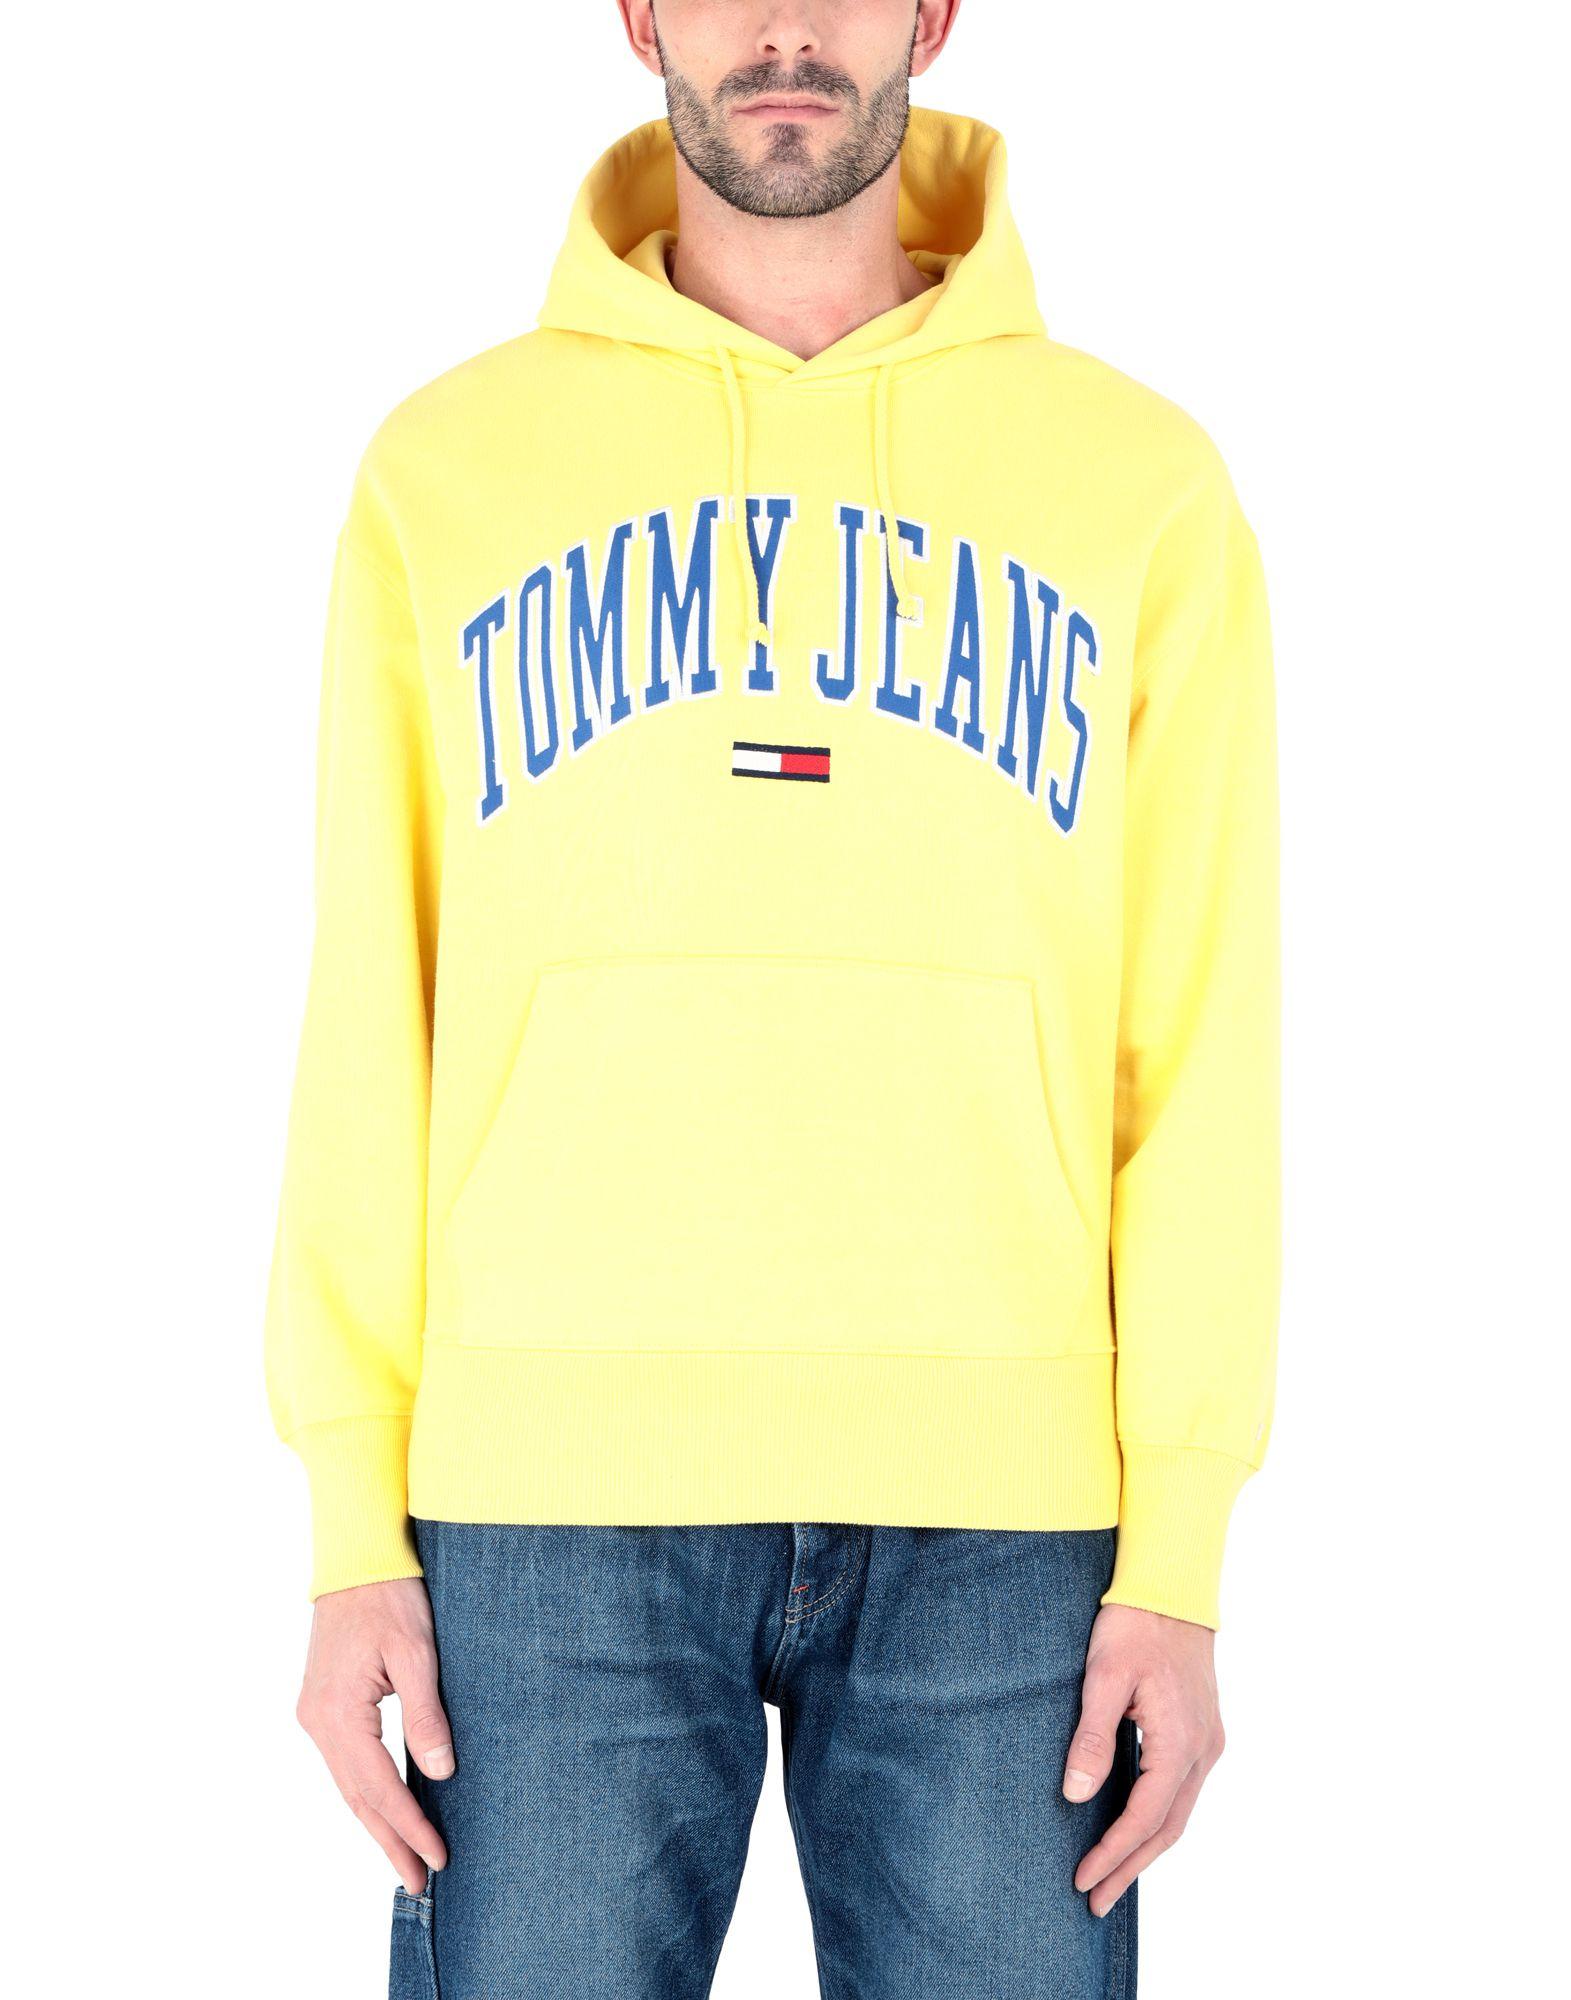 tommy yellow hoodie